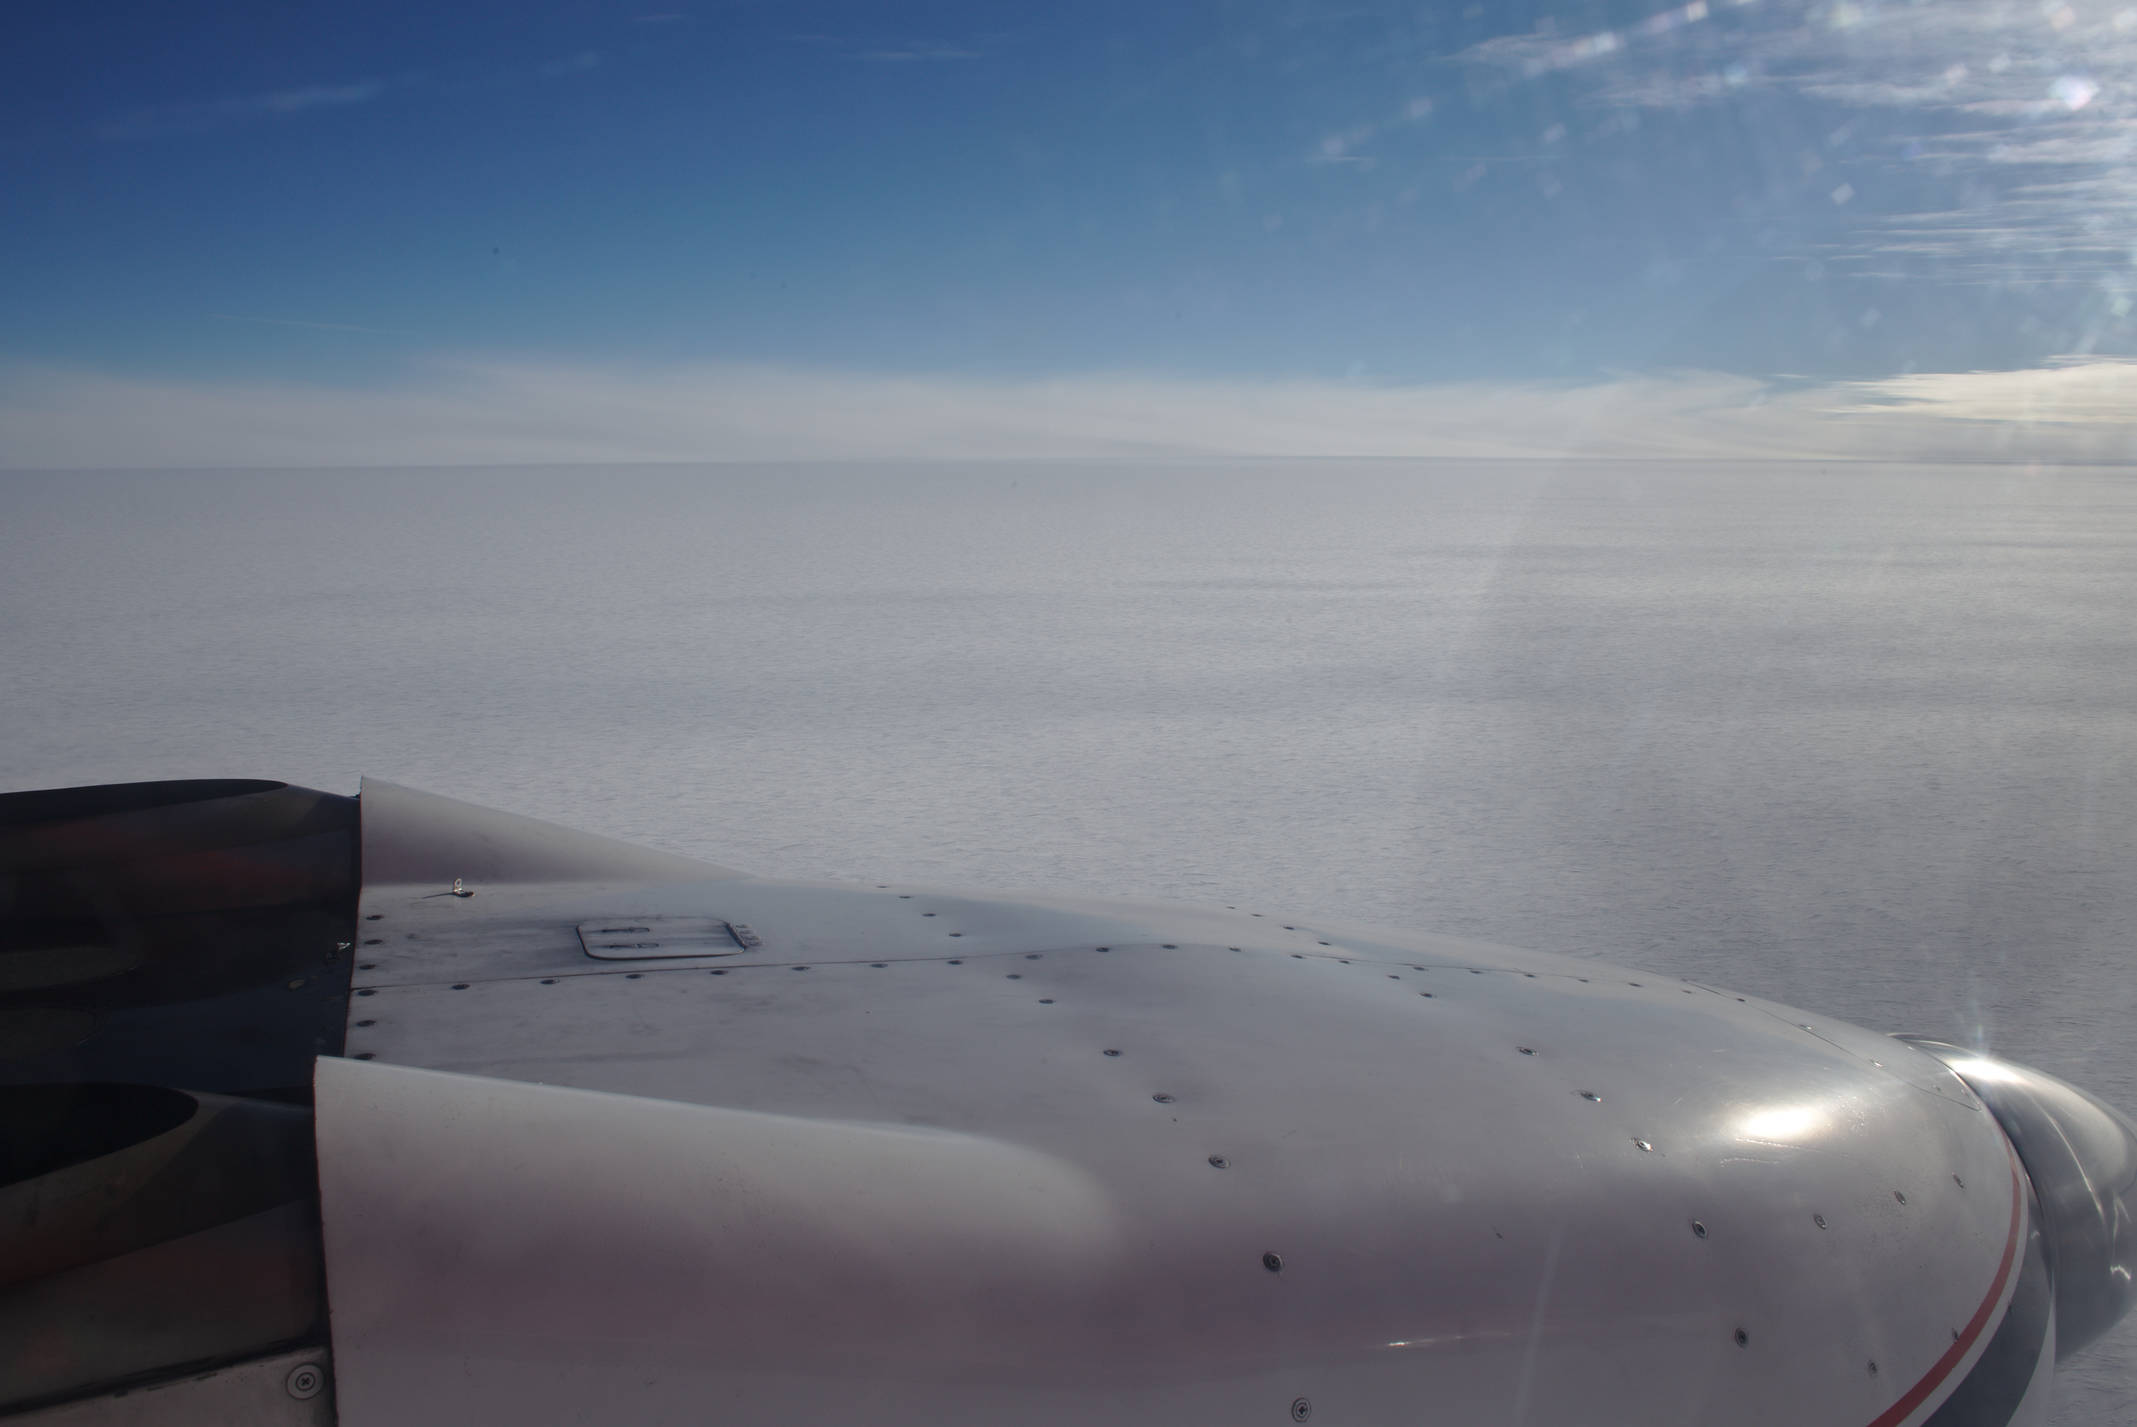 The Antarctic plateau. Nothing but flat and white for the next 120 minutes of flight time